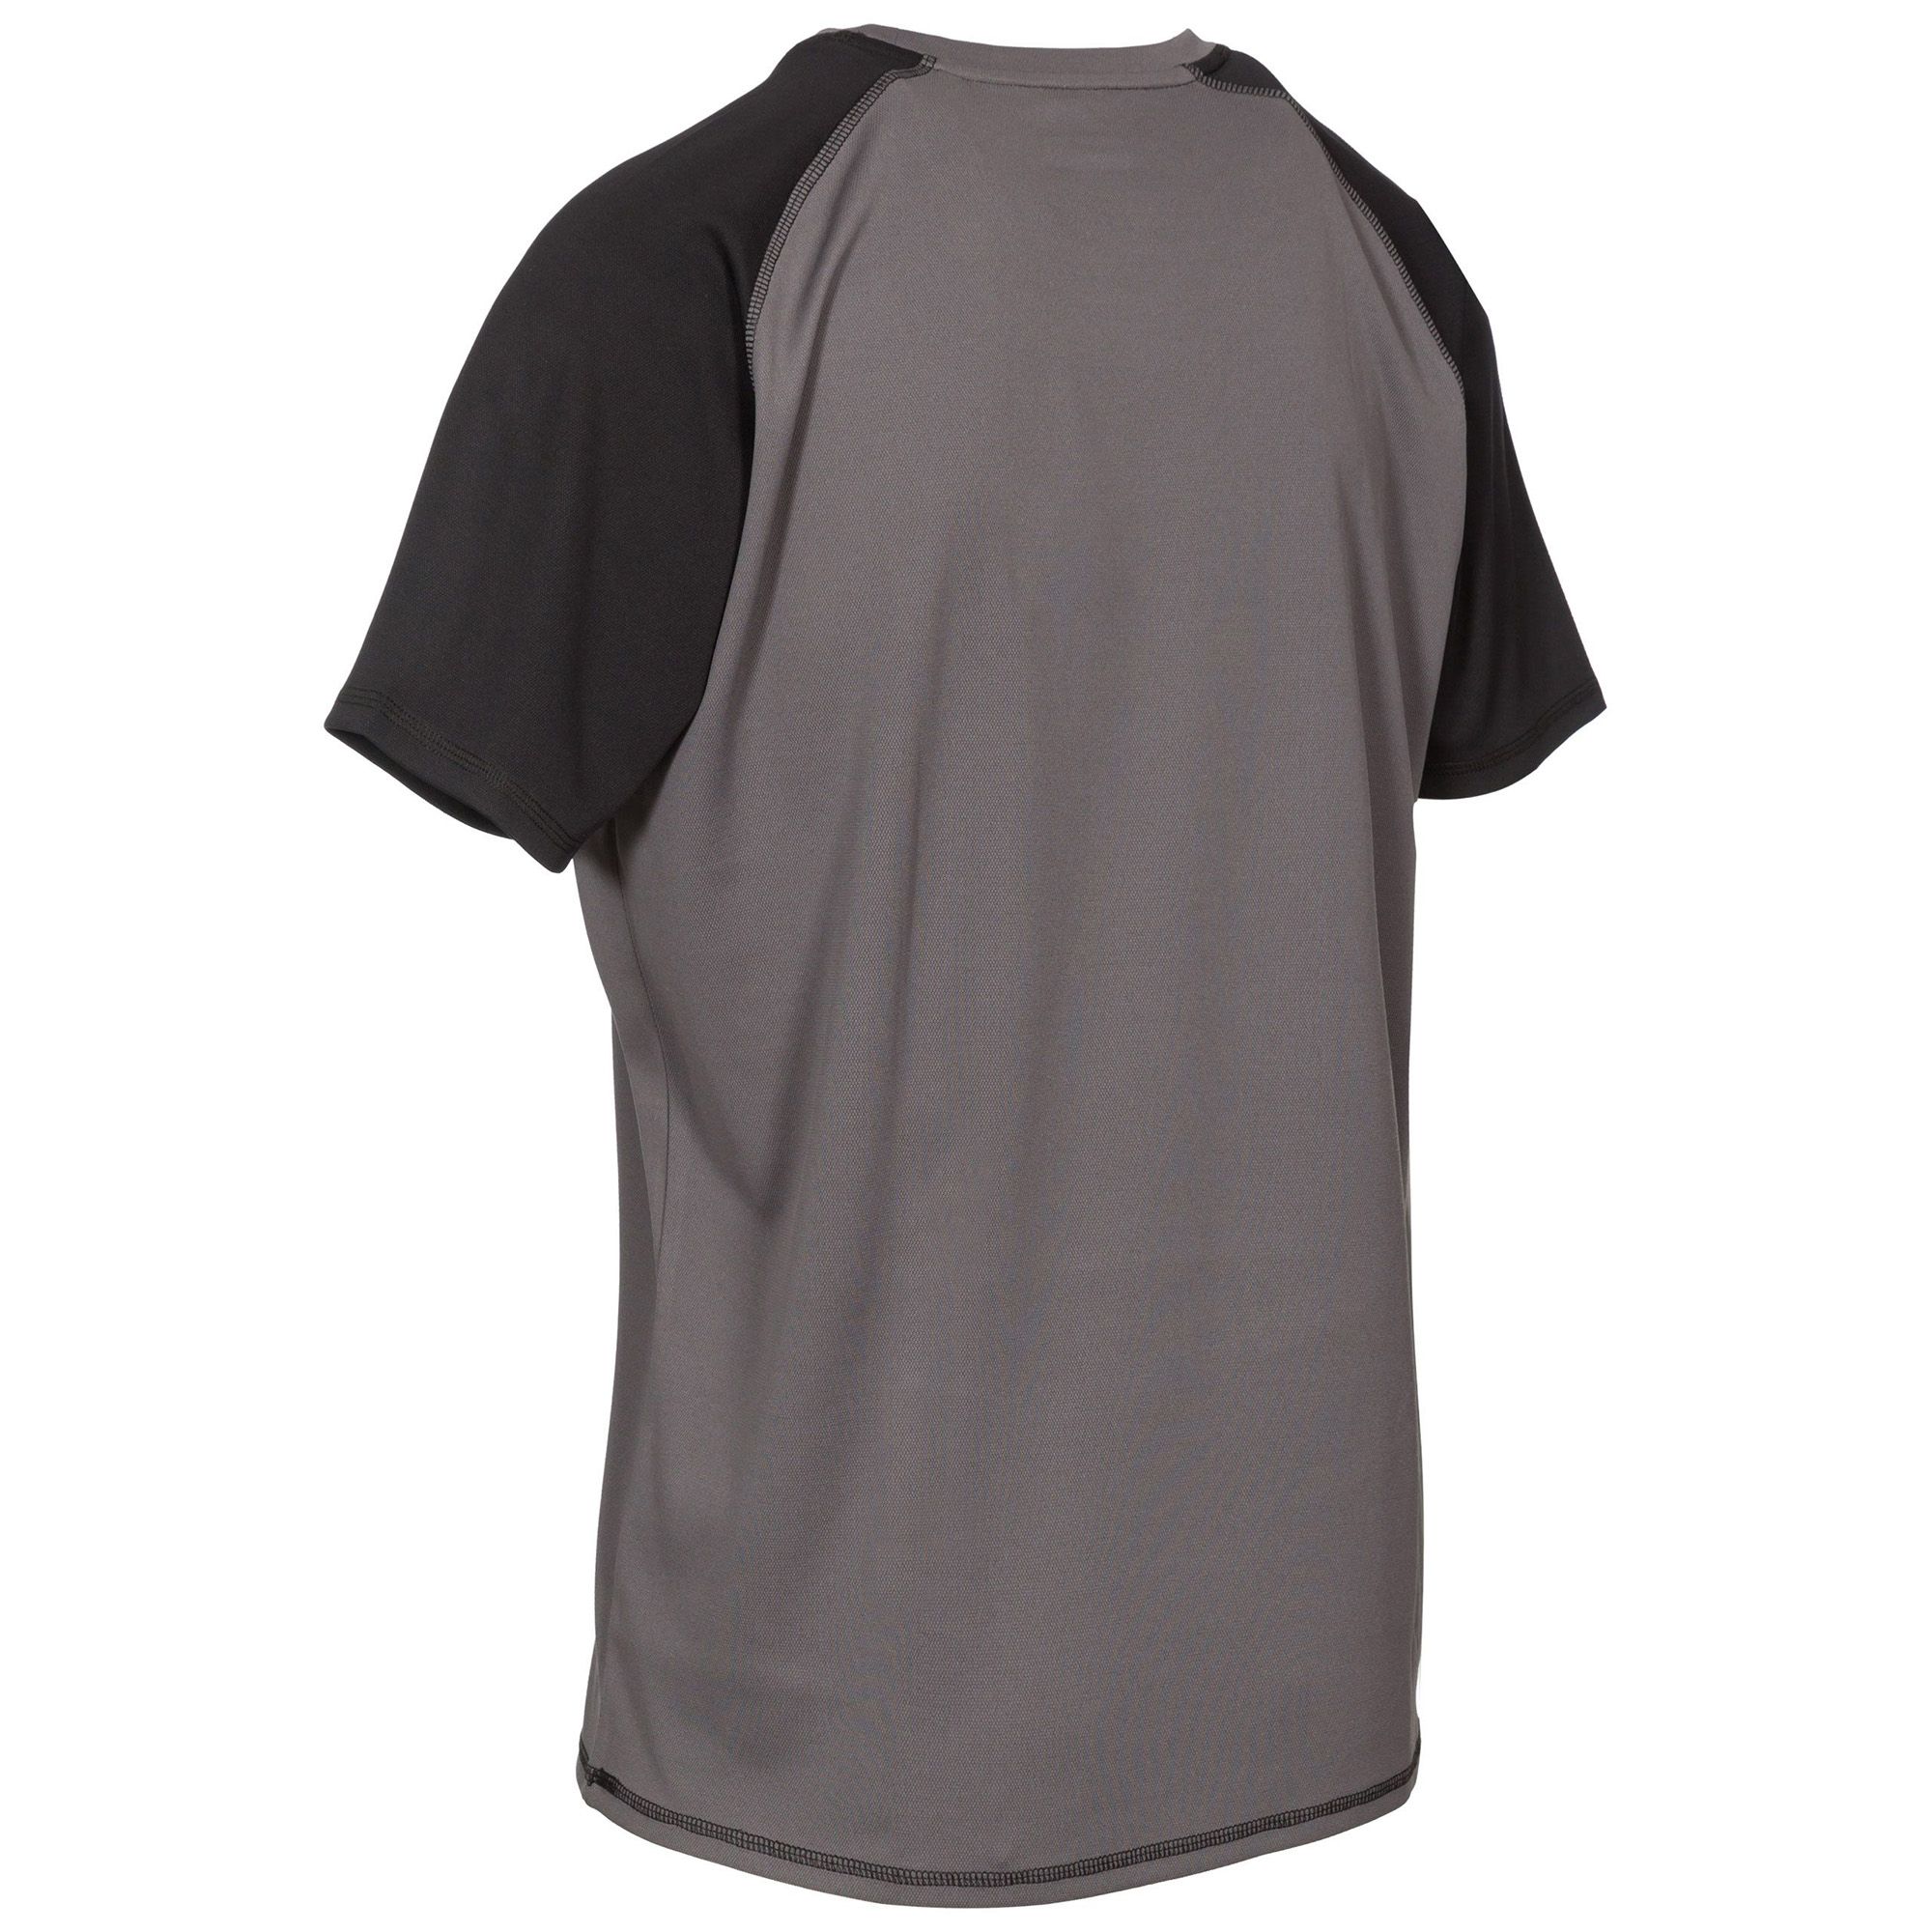 Mens short sleeved athletic T-shirt with round neck and contrast inner neck trim. Quick drying. Ideal for any form of exercise. 100% Polyester.